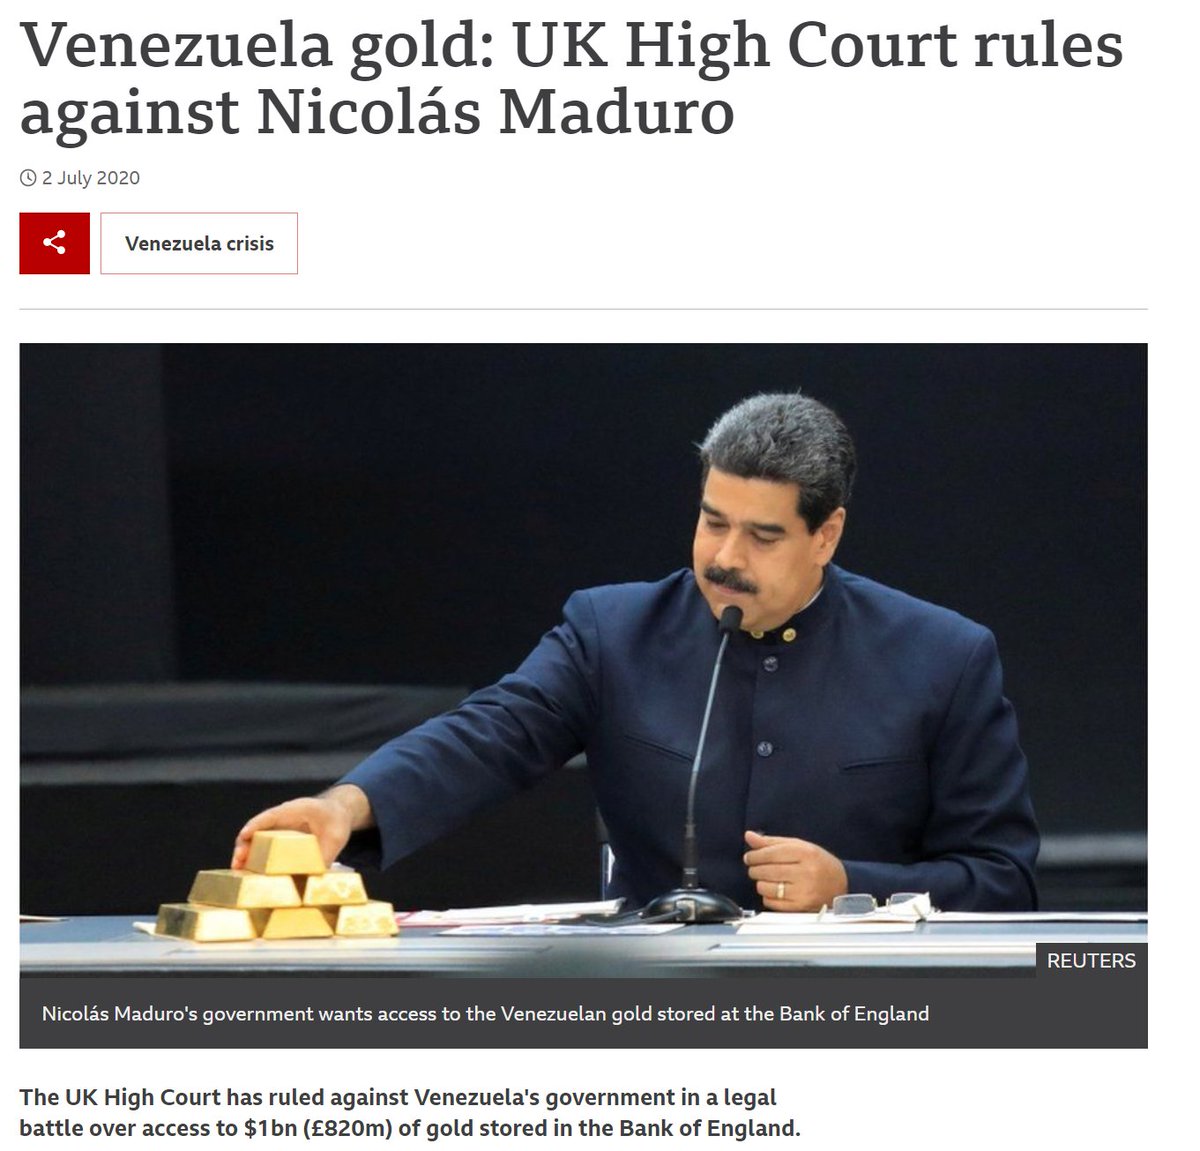 This is not to mention the even greater savings that can be had in *transmitting* this wealth. The ability to custody cheaply is not a trivial comparative advantage. Nation-states such as Venezuela now understand the risks of having their gold in the hands of antagonistic states.